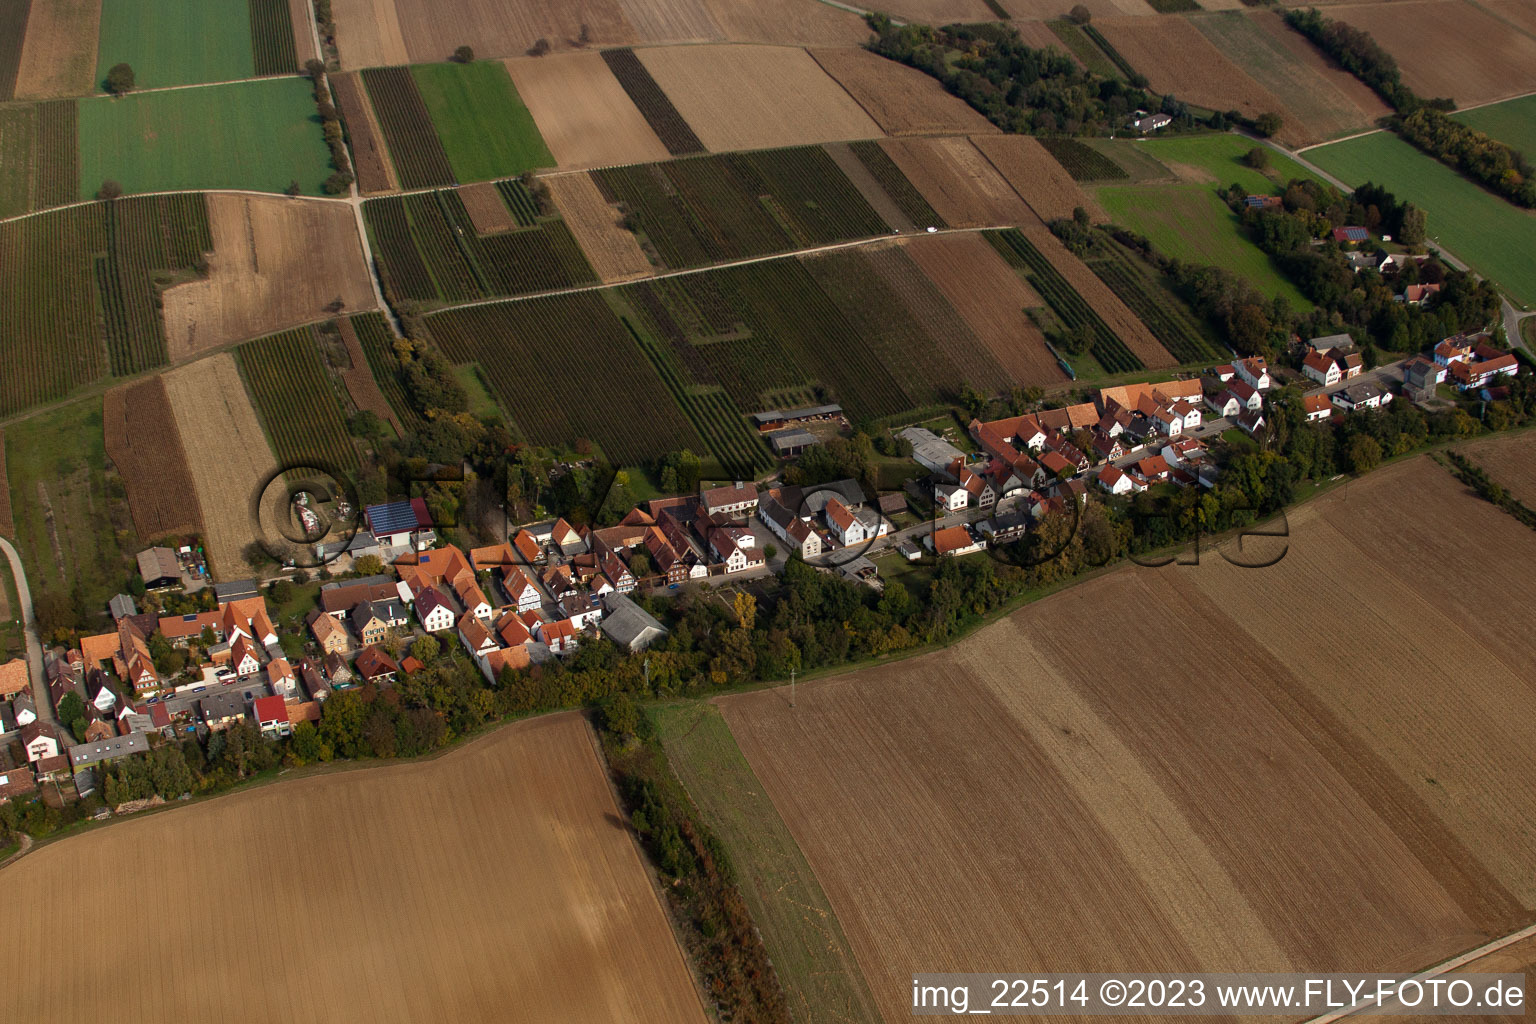 Vollmersweiler in the state Rhineland-Palatinate, Germany seen from a drone